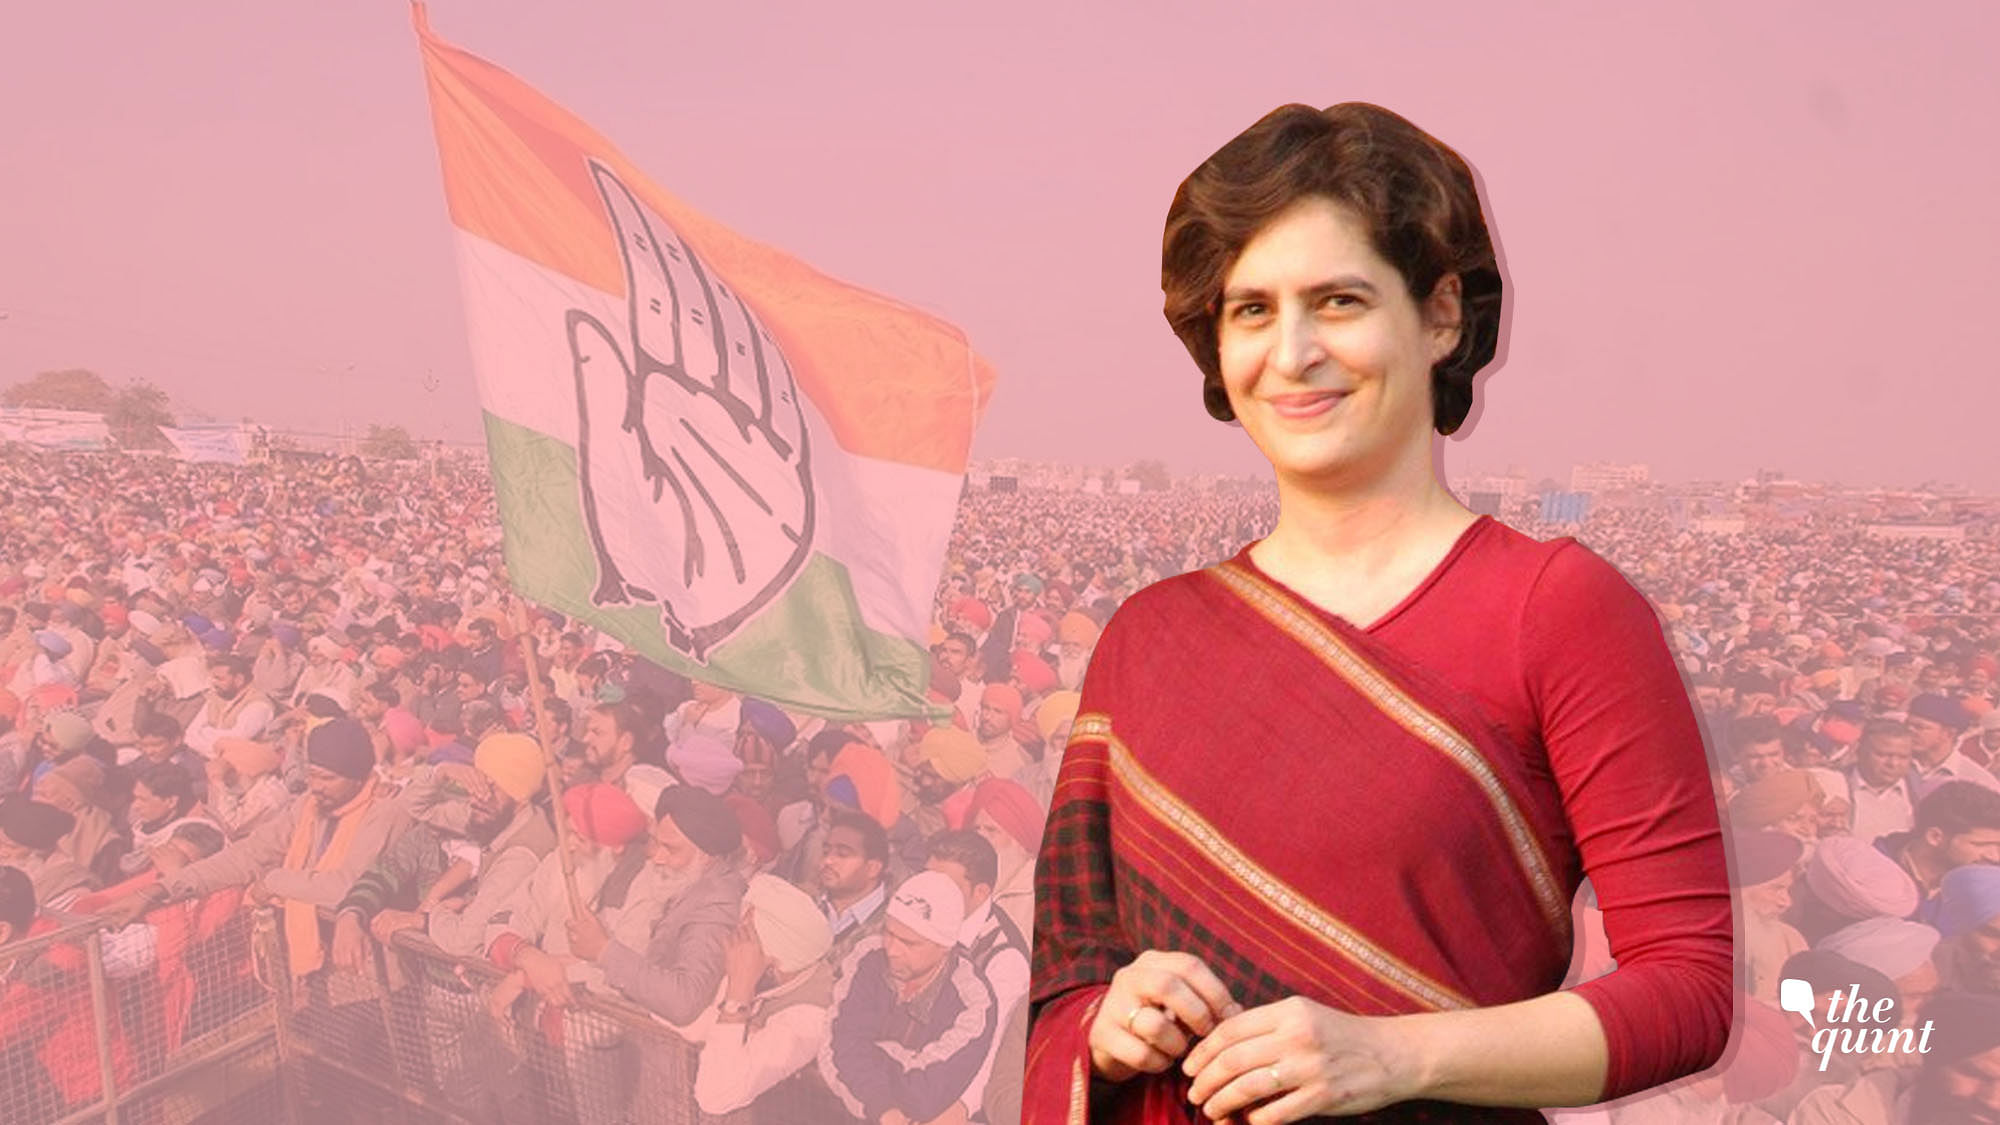 Priyanka Gandhi said she “wants to focus on the 41 seats in Uttar Pradesh” and is currently “busy campaigning” for the party.